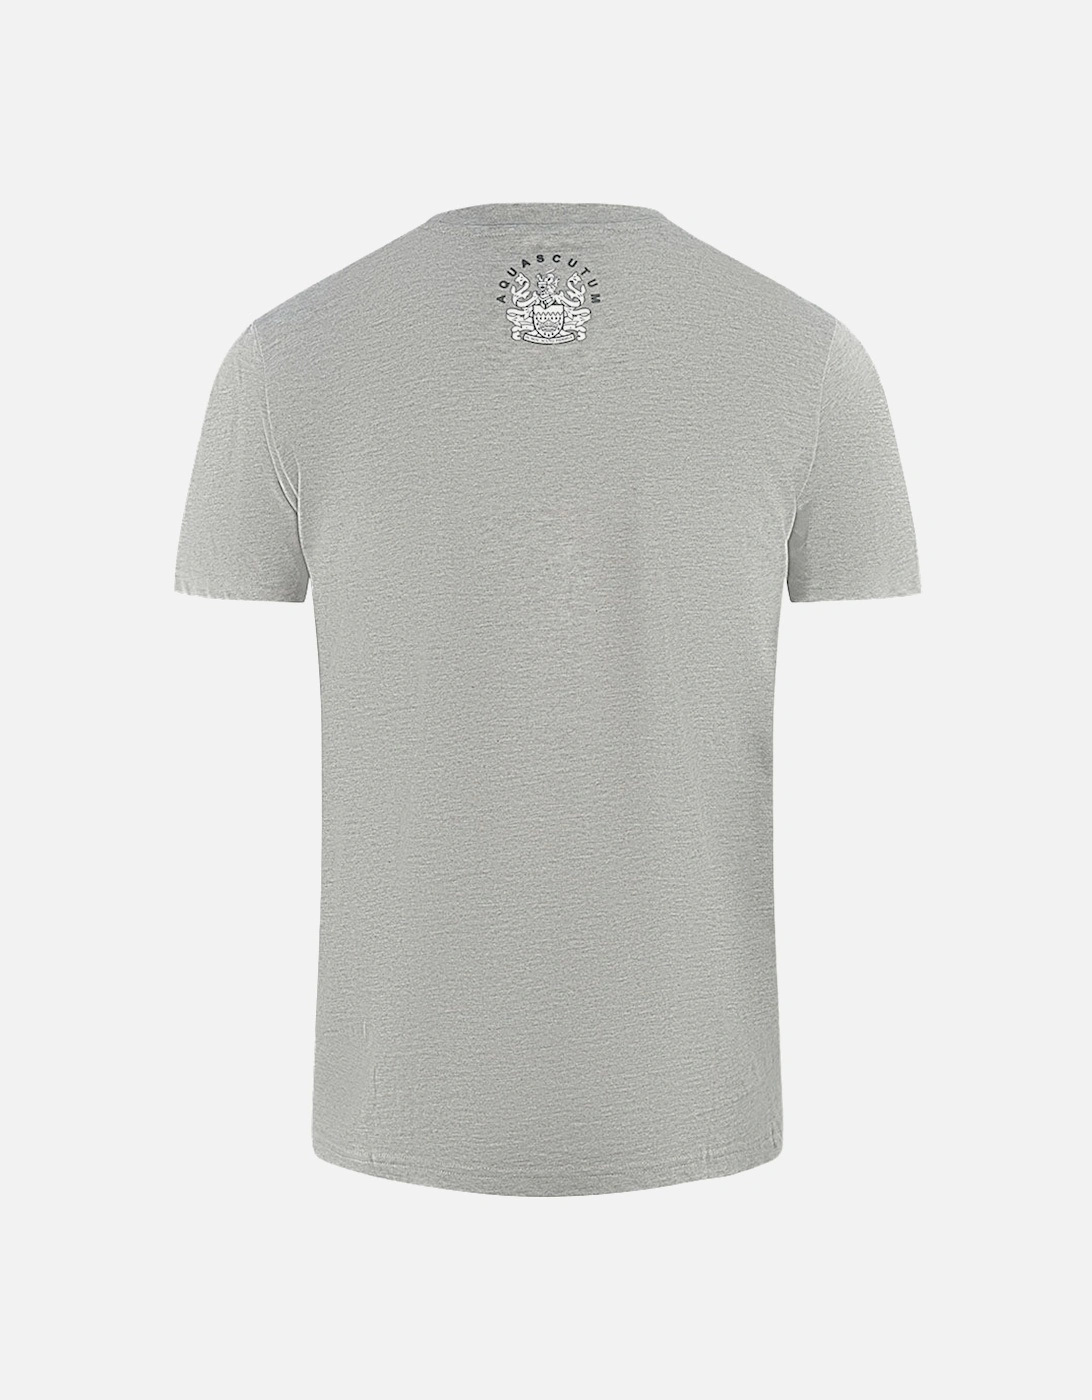 London Embroidered A Logo Grey T-Shirt